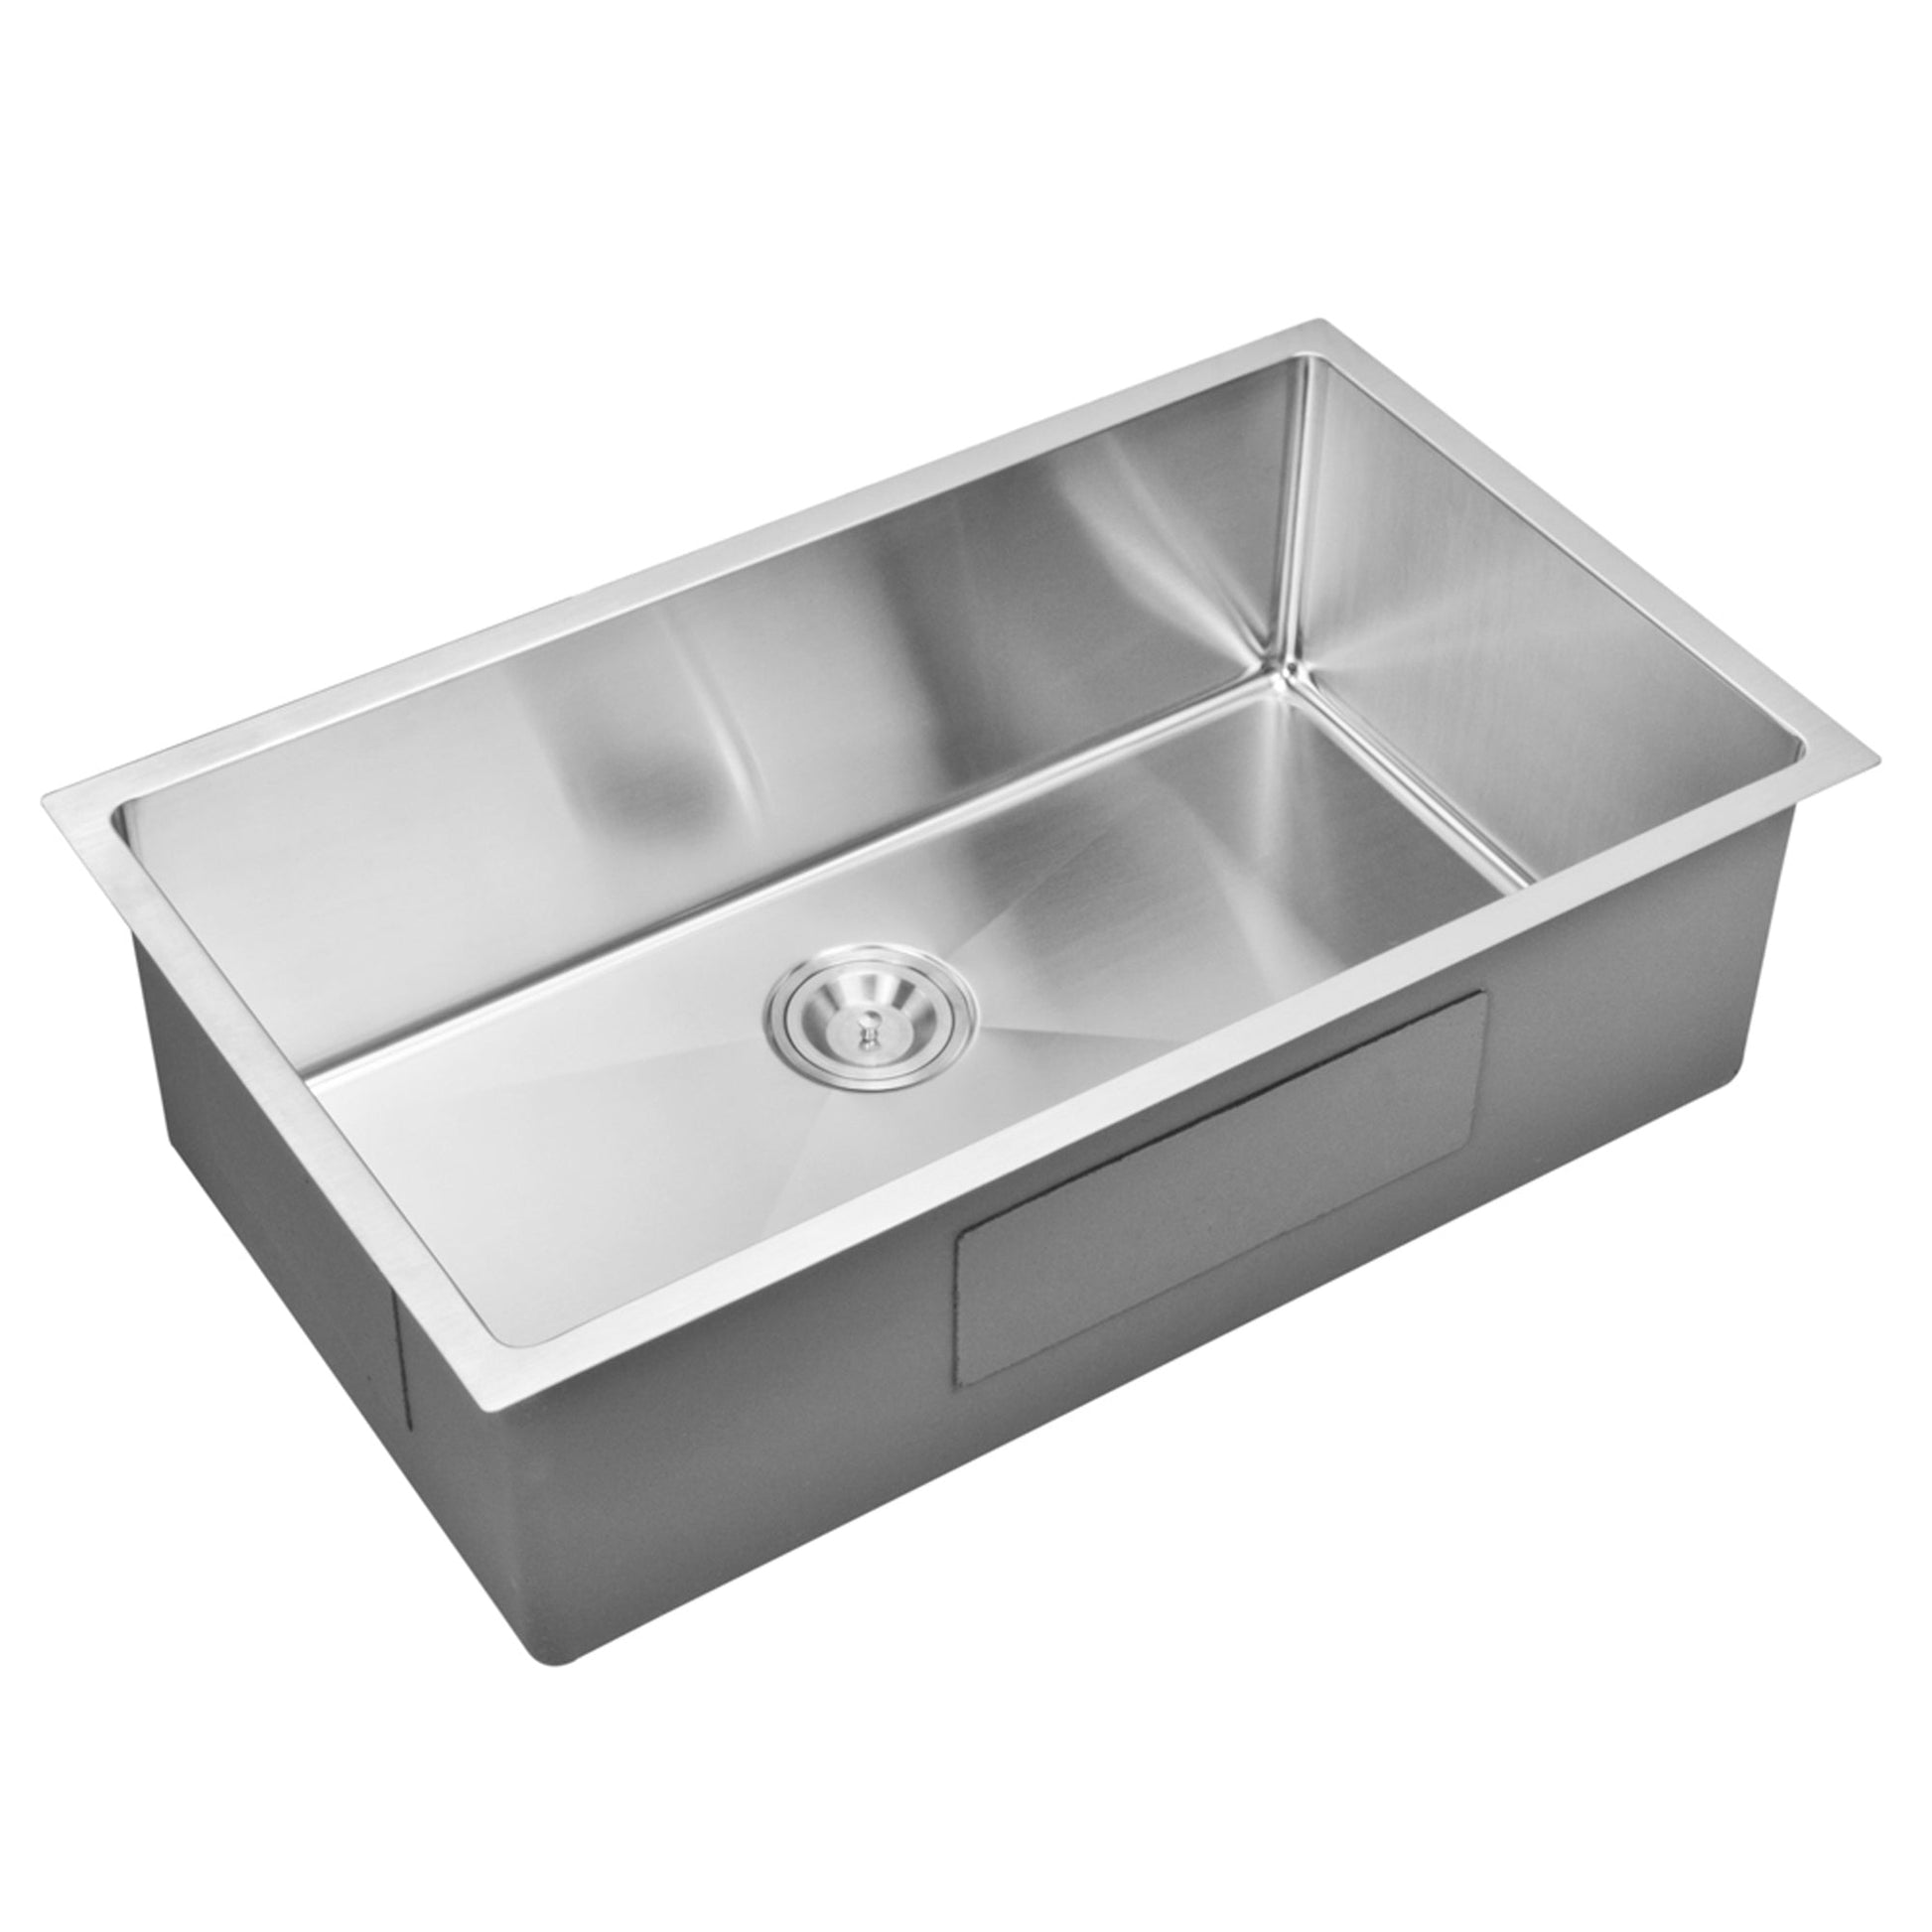 Water Creation Corner Radius Single Bowl Stainless Steel Hand Made Undermount 32 Inch X 19 Inch Sink With Drain, Strainer, And Bottom Grid